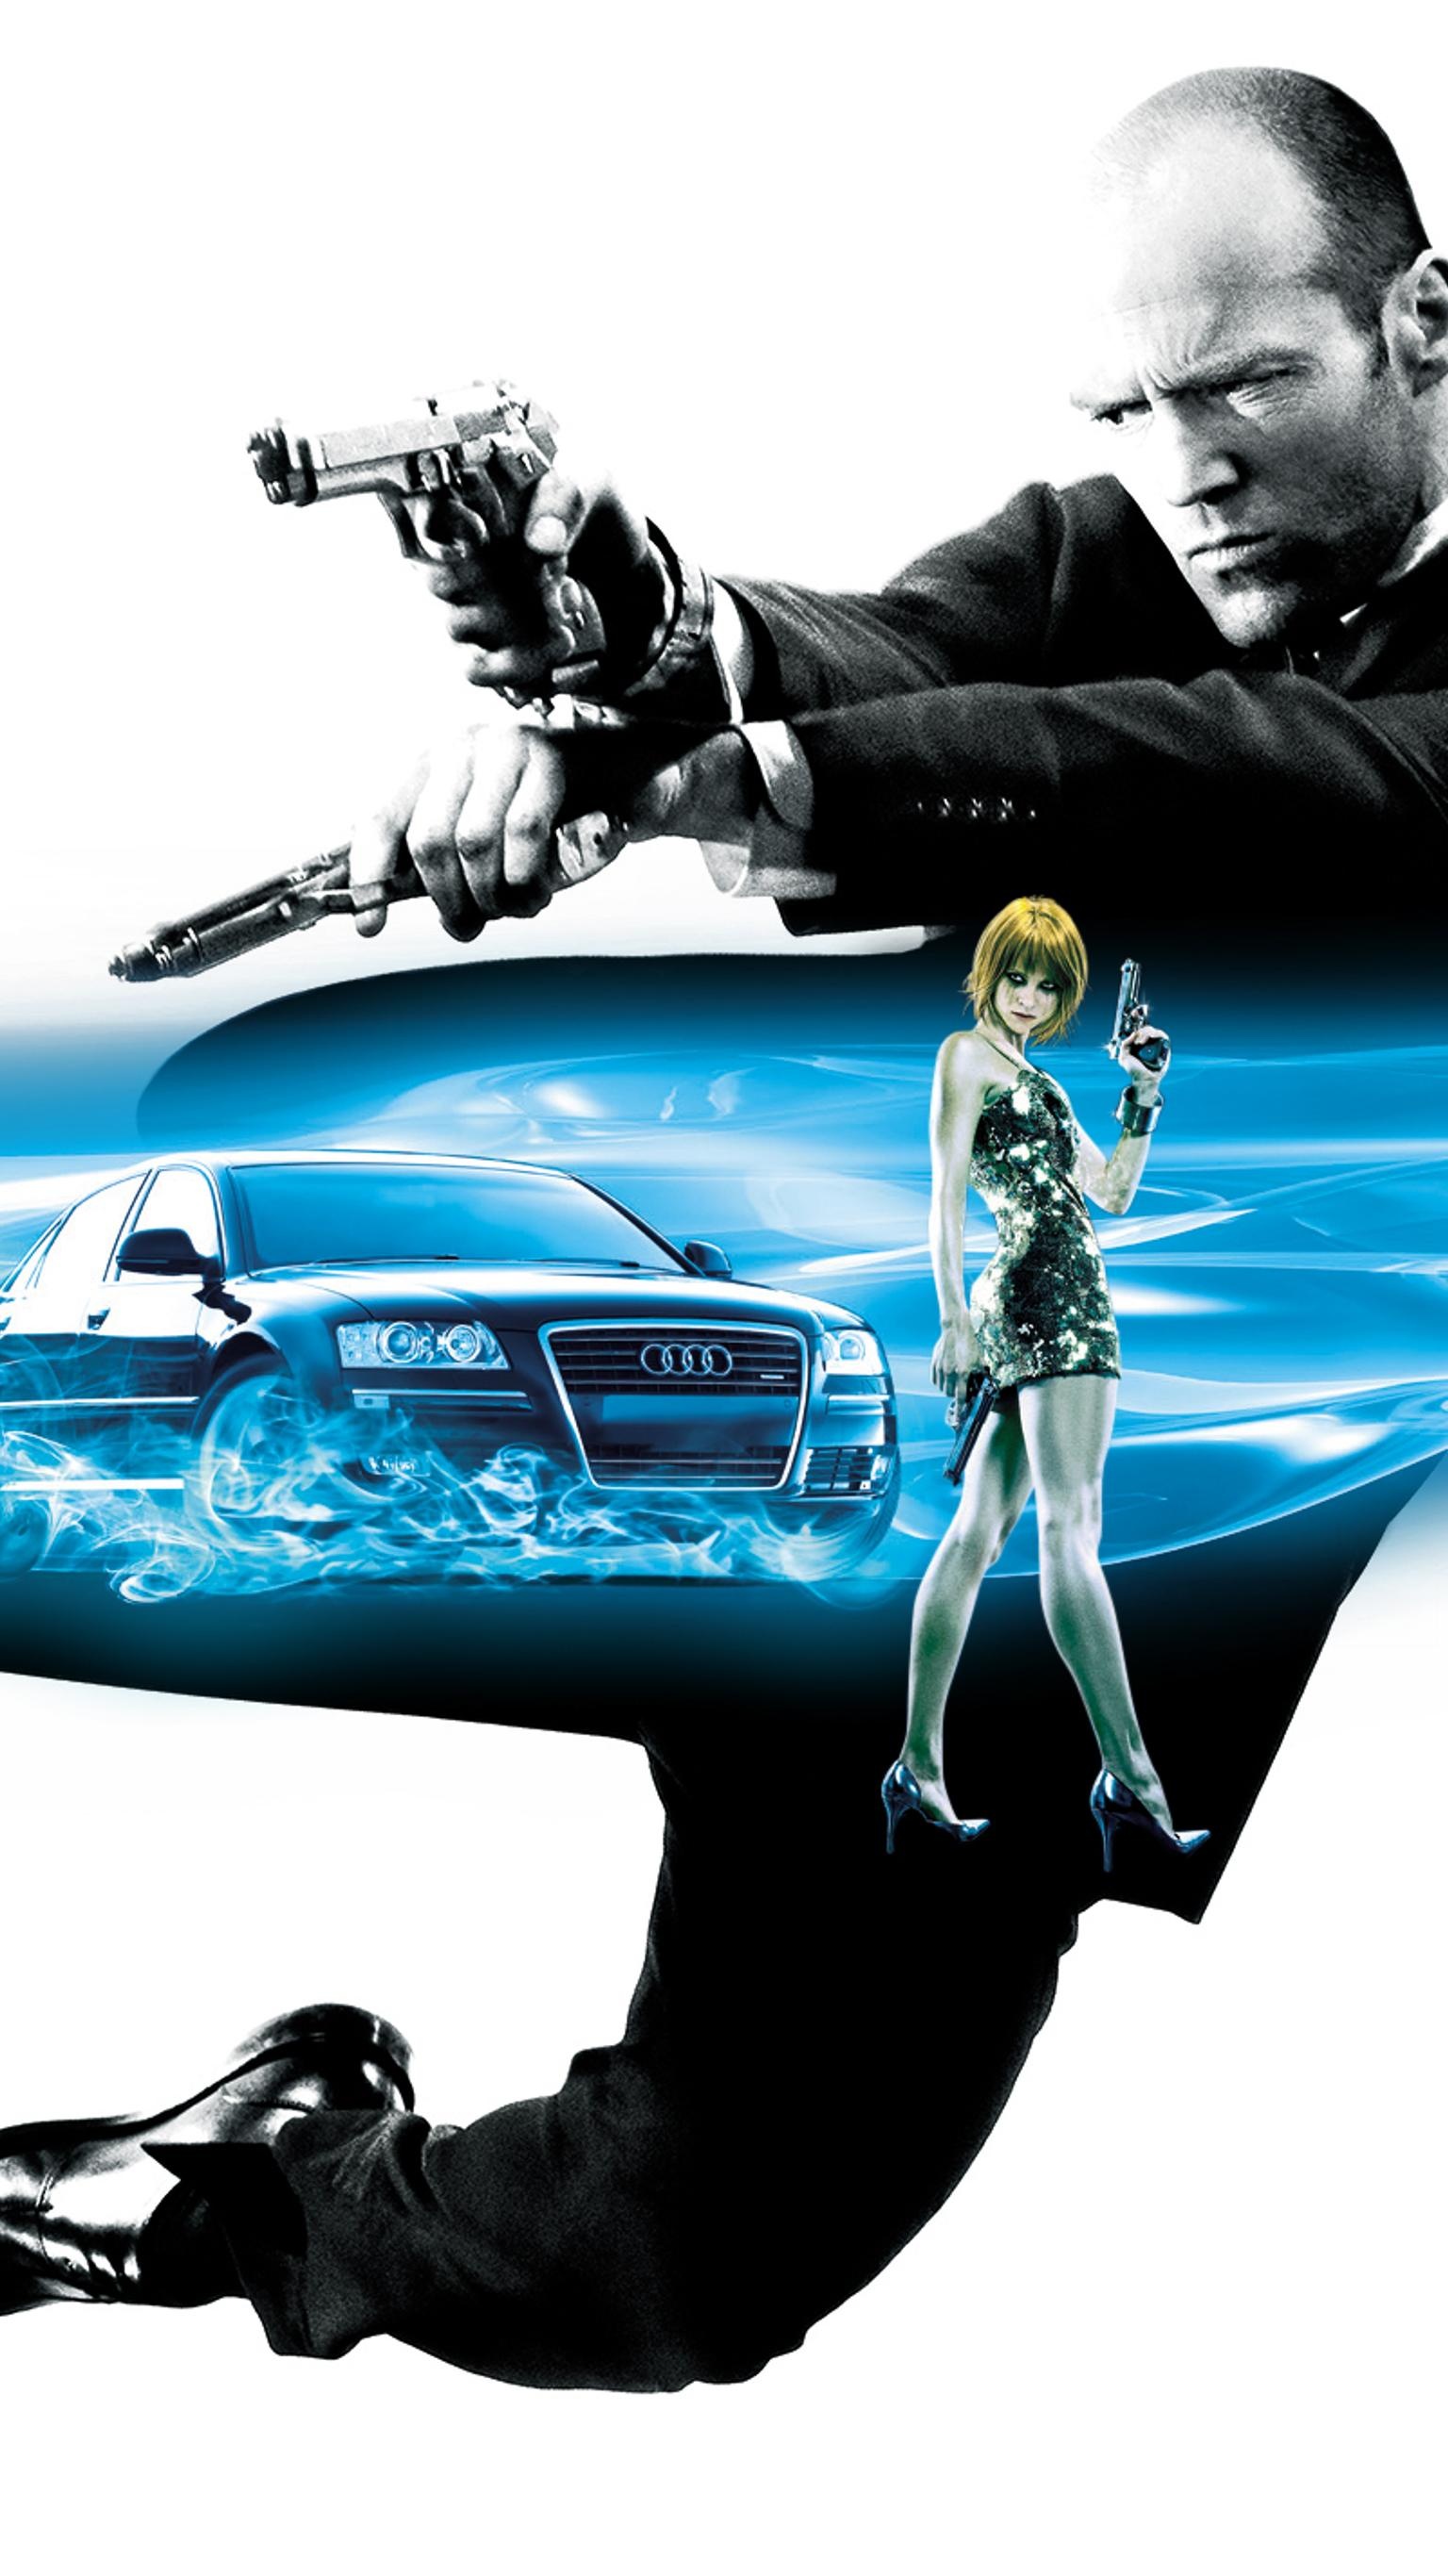 Transporter franchise legacy, Action-packed thrillers, Fast-paced adrenaline, Jason Statham's charm, 1540x2740 HD Phone